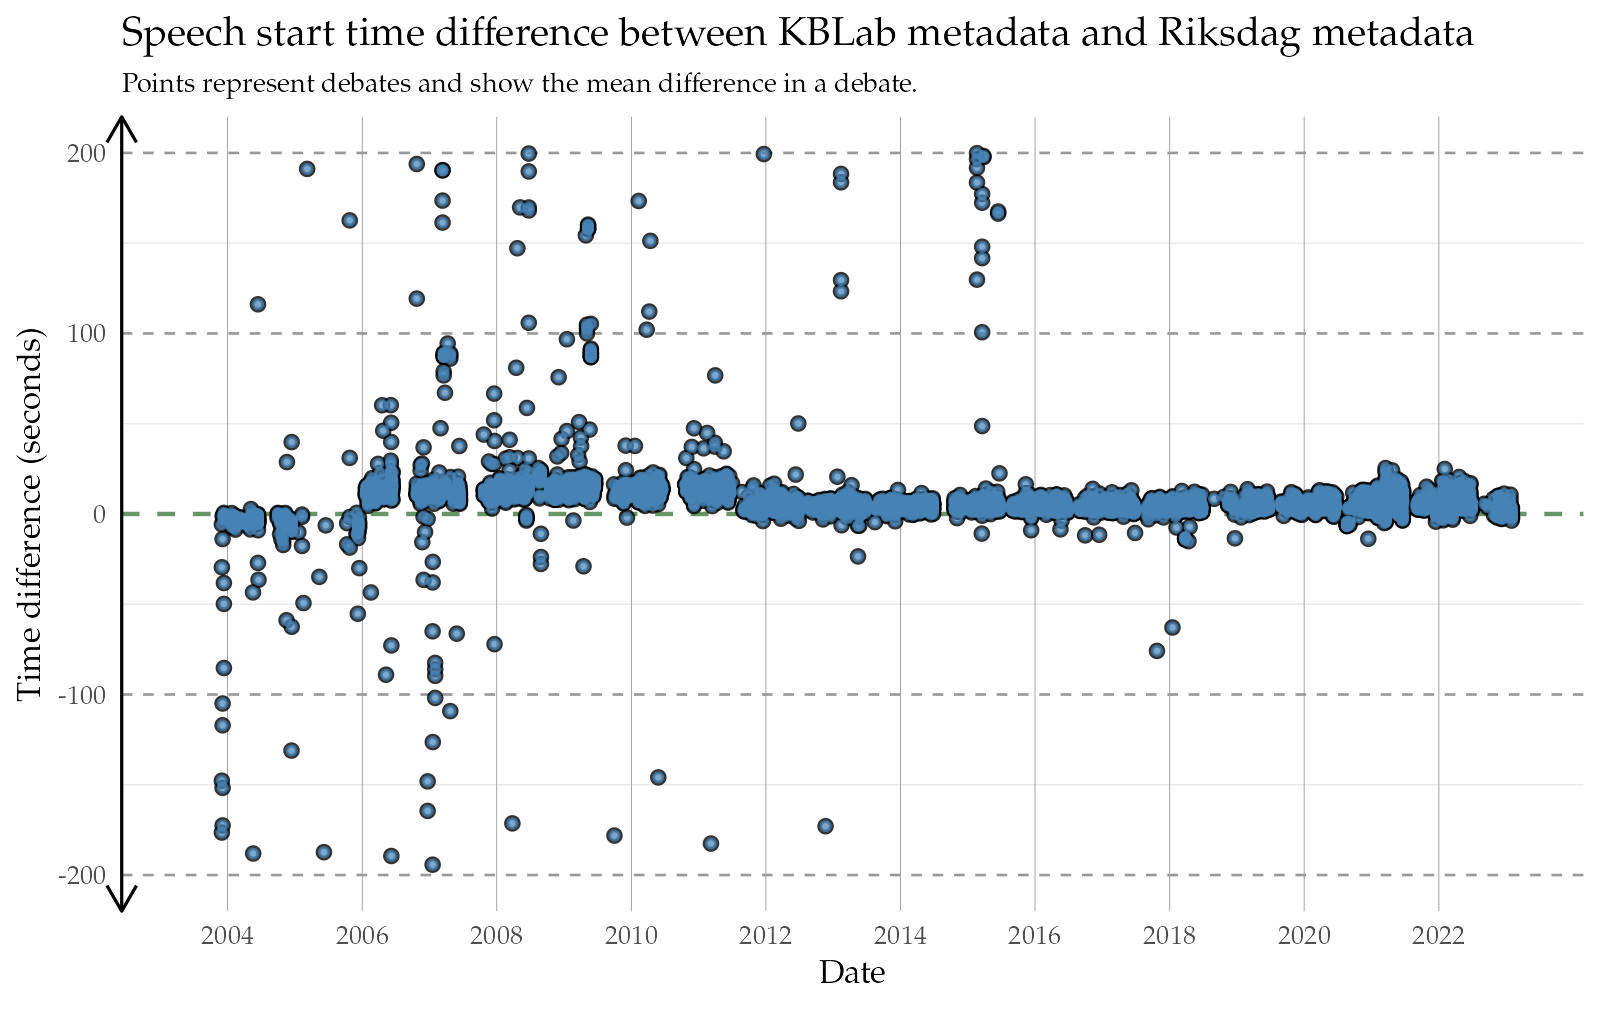 Mean difference between KBLab adjusted metadata and the Riksdag. **Left** plot shows the difference between 'start' metata, and the **right** plot the difference between 'end' metadata. In general the Riksdag's start markers tend to bias towards beginning a few seconds before the actual speech, and ending later than the actual ending. The plot shows a zoomed in view between -200 and +200 seconds to emphasize general trends. There also exist debates for which the metadata is off by thousands of seconds.